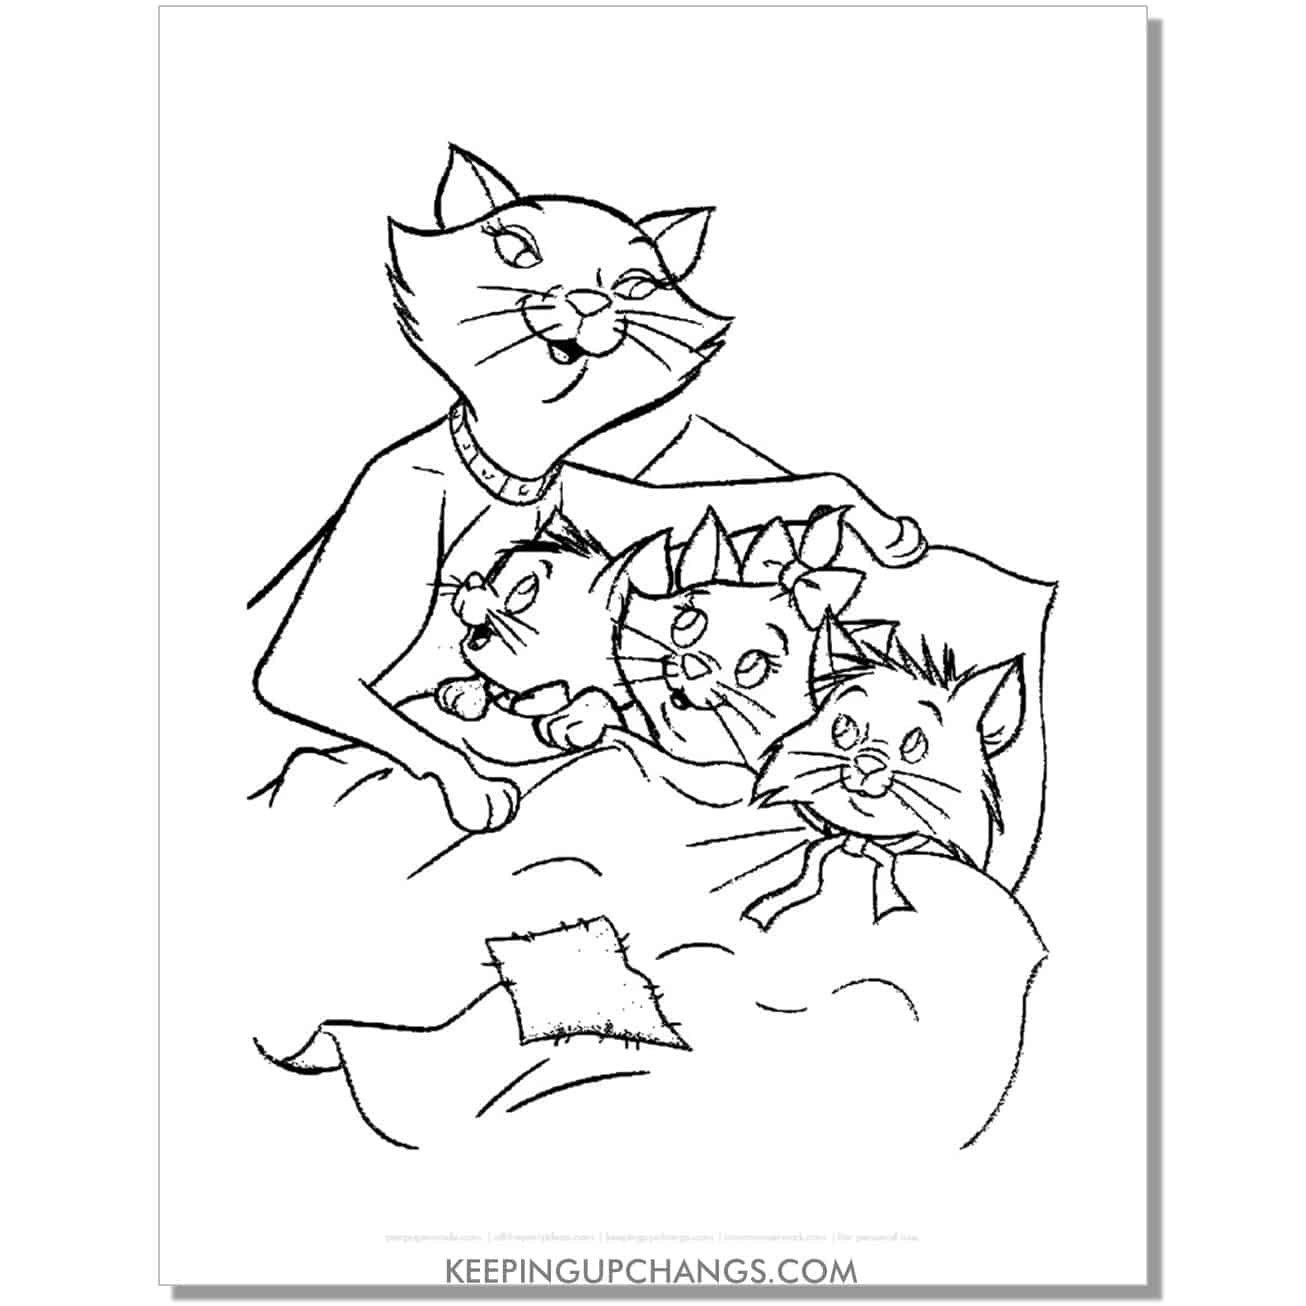 duchess tucks in marie, toulouse, berlioz aristocats coloring page, sheet.